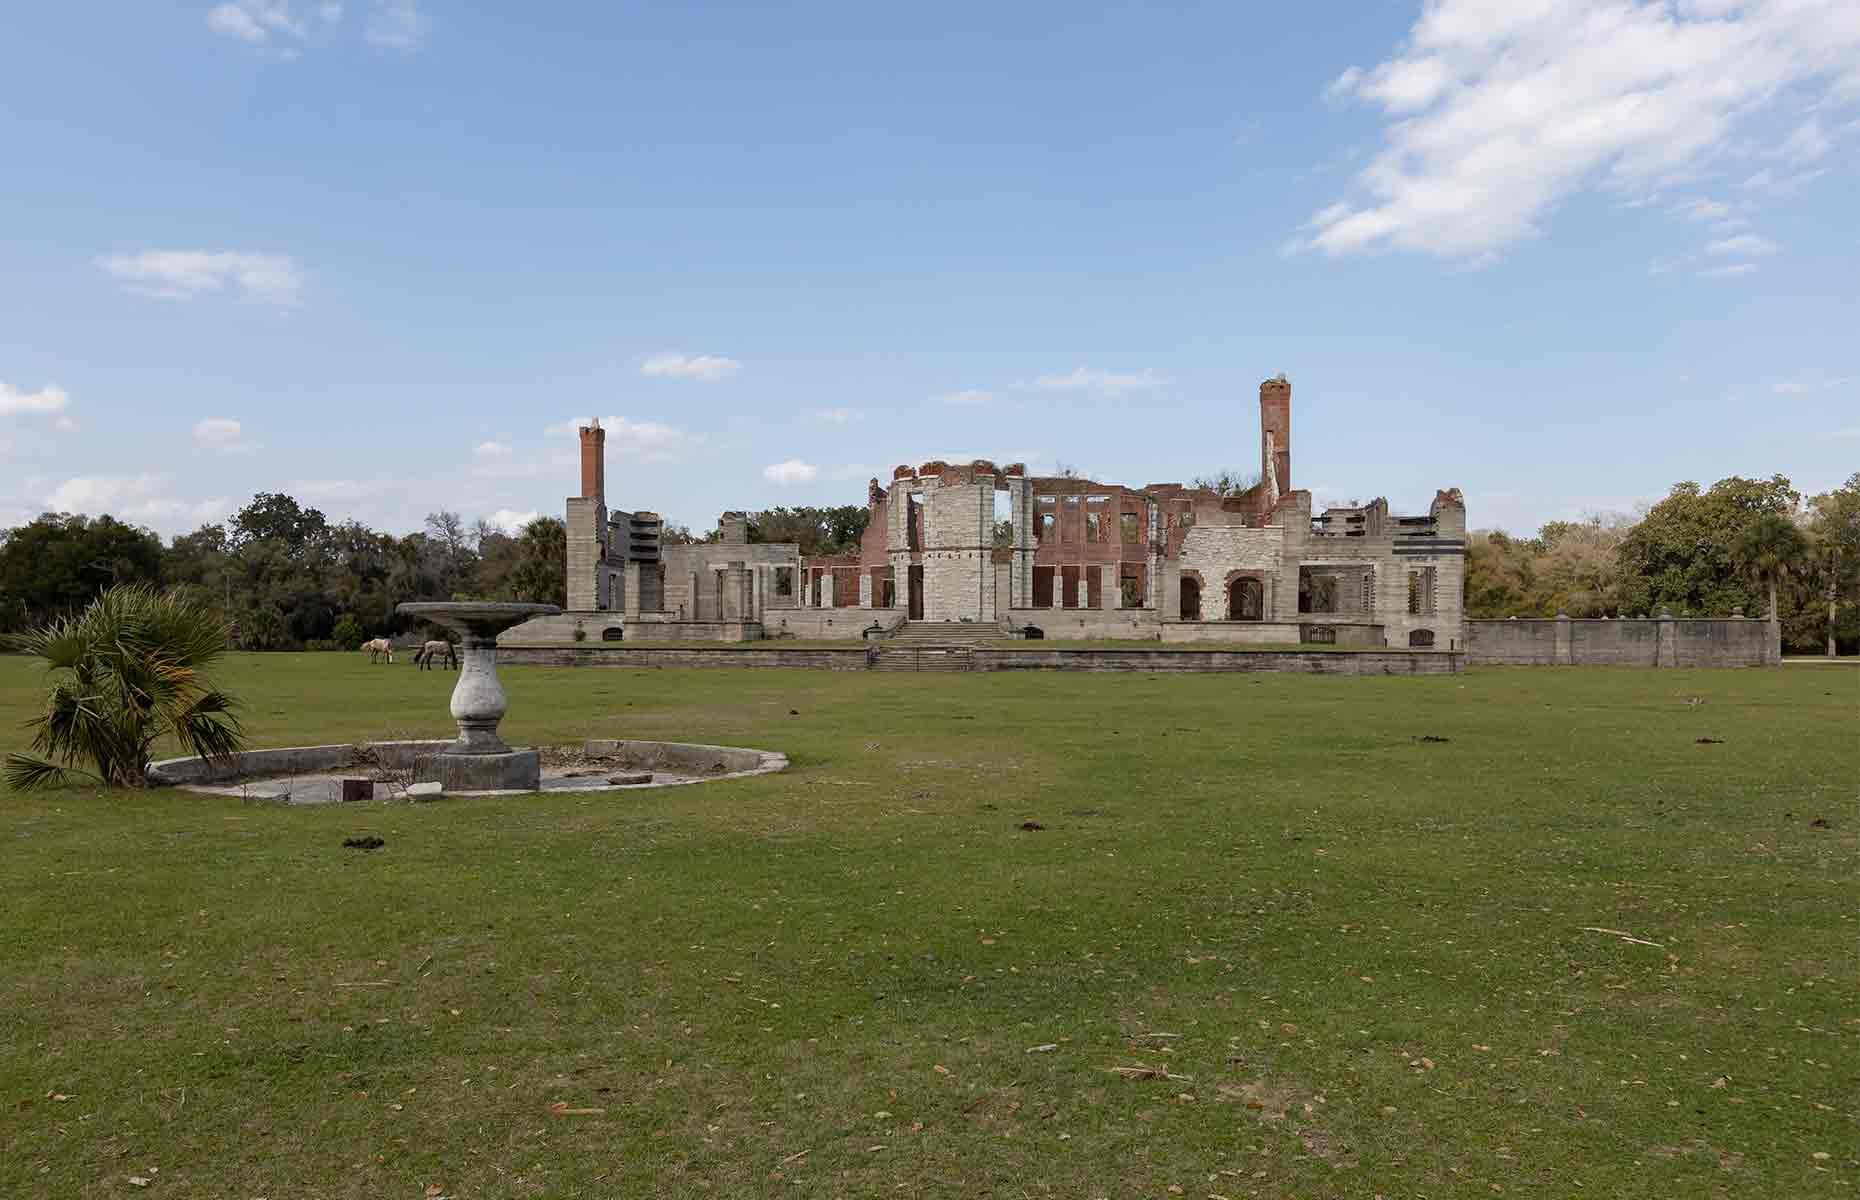 <p>Lucy’s estate was sufficient to maintain the property until the financial crash of 1929, at which point the Carnegie family was forced to abandon the mansion forever.</p>  <p>Thirty years later, a mysterious fire broke out at <a href="https://abandonedsoutheast.com/2023/03/06/dungeness-ruins/">Dungeness</a>, destroying the house and the majority of the auxiliary buildings, leaving behind only haunting ruins of what had once been a magnificent European-inspired mansion.</p>